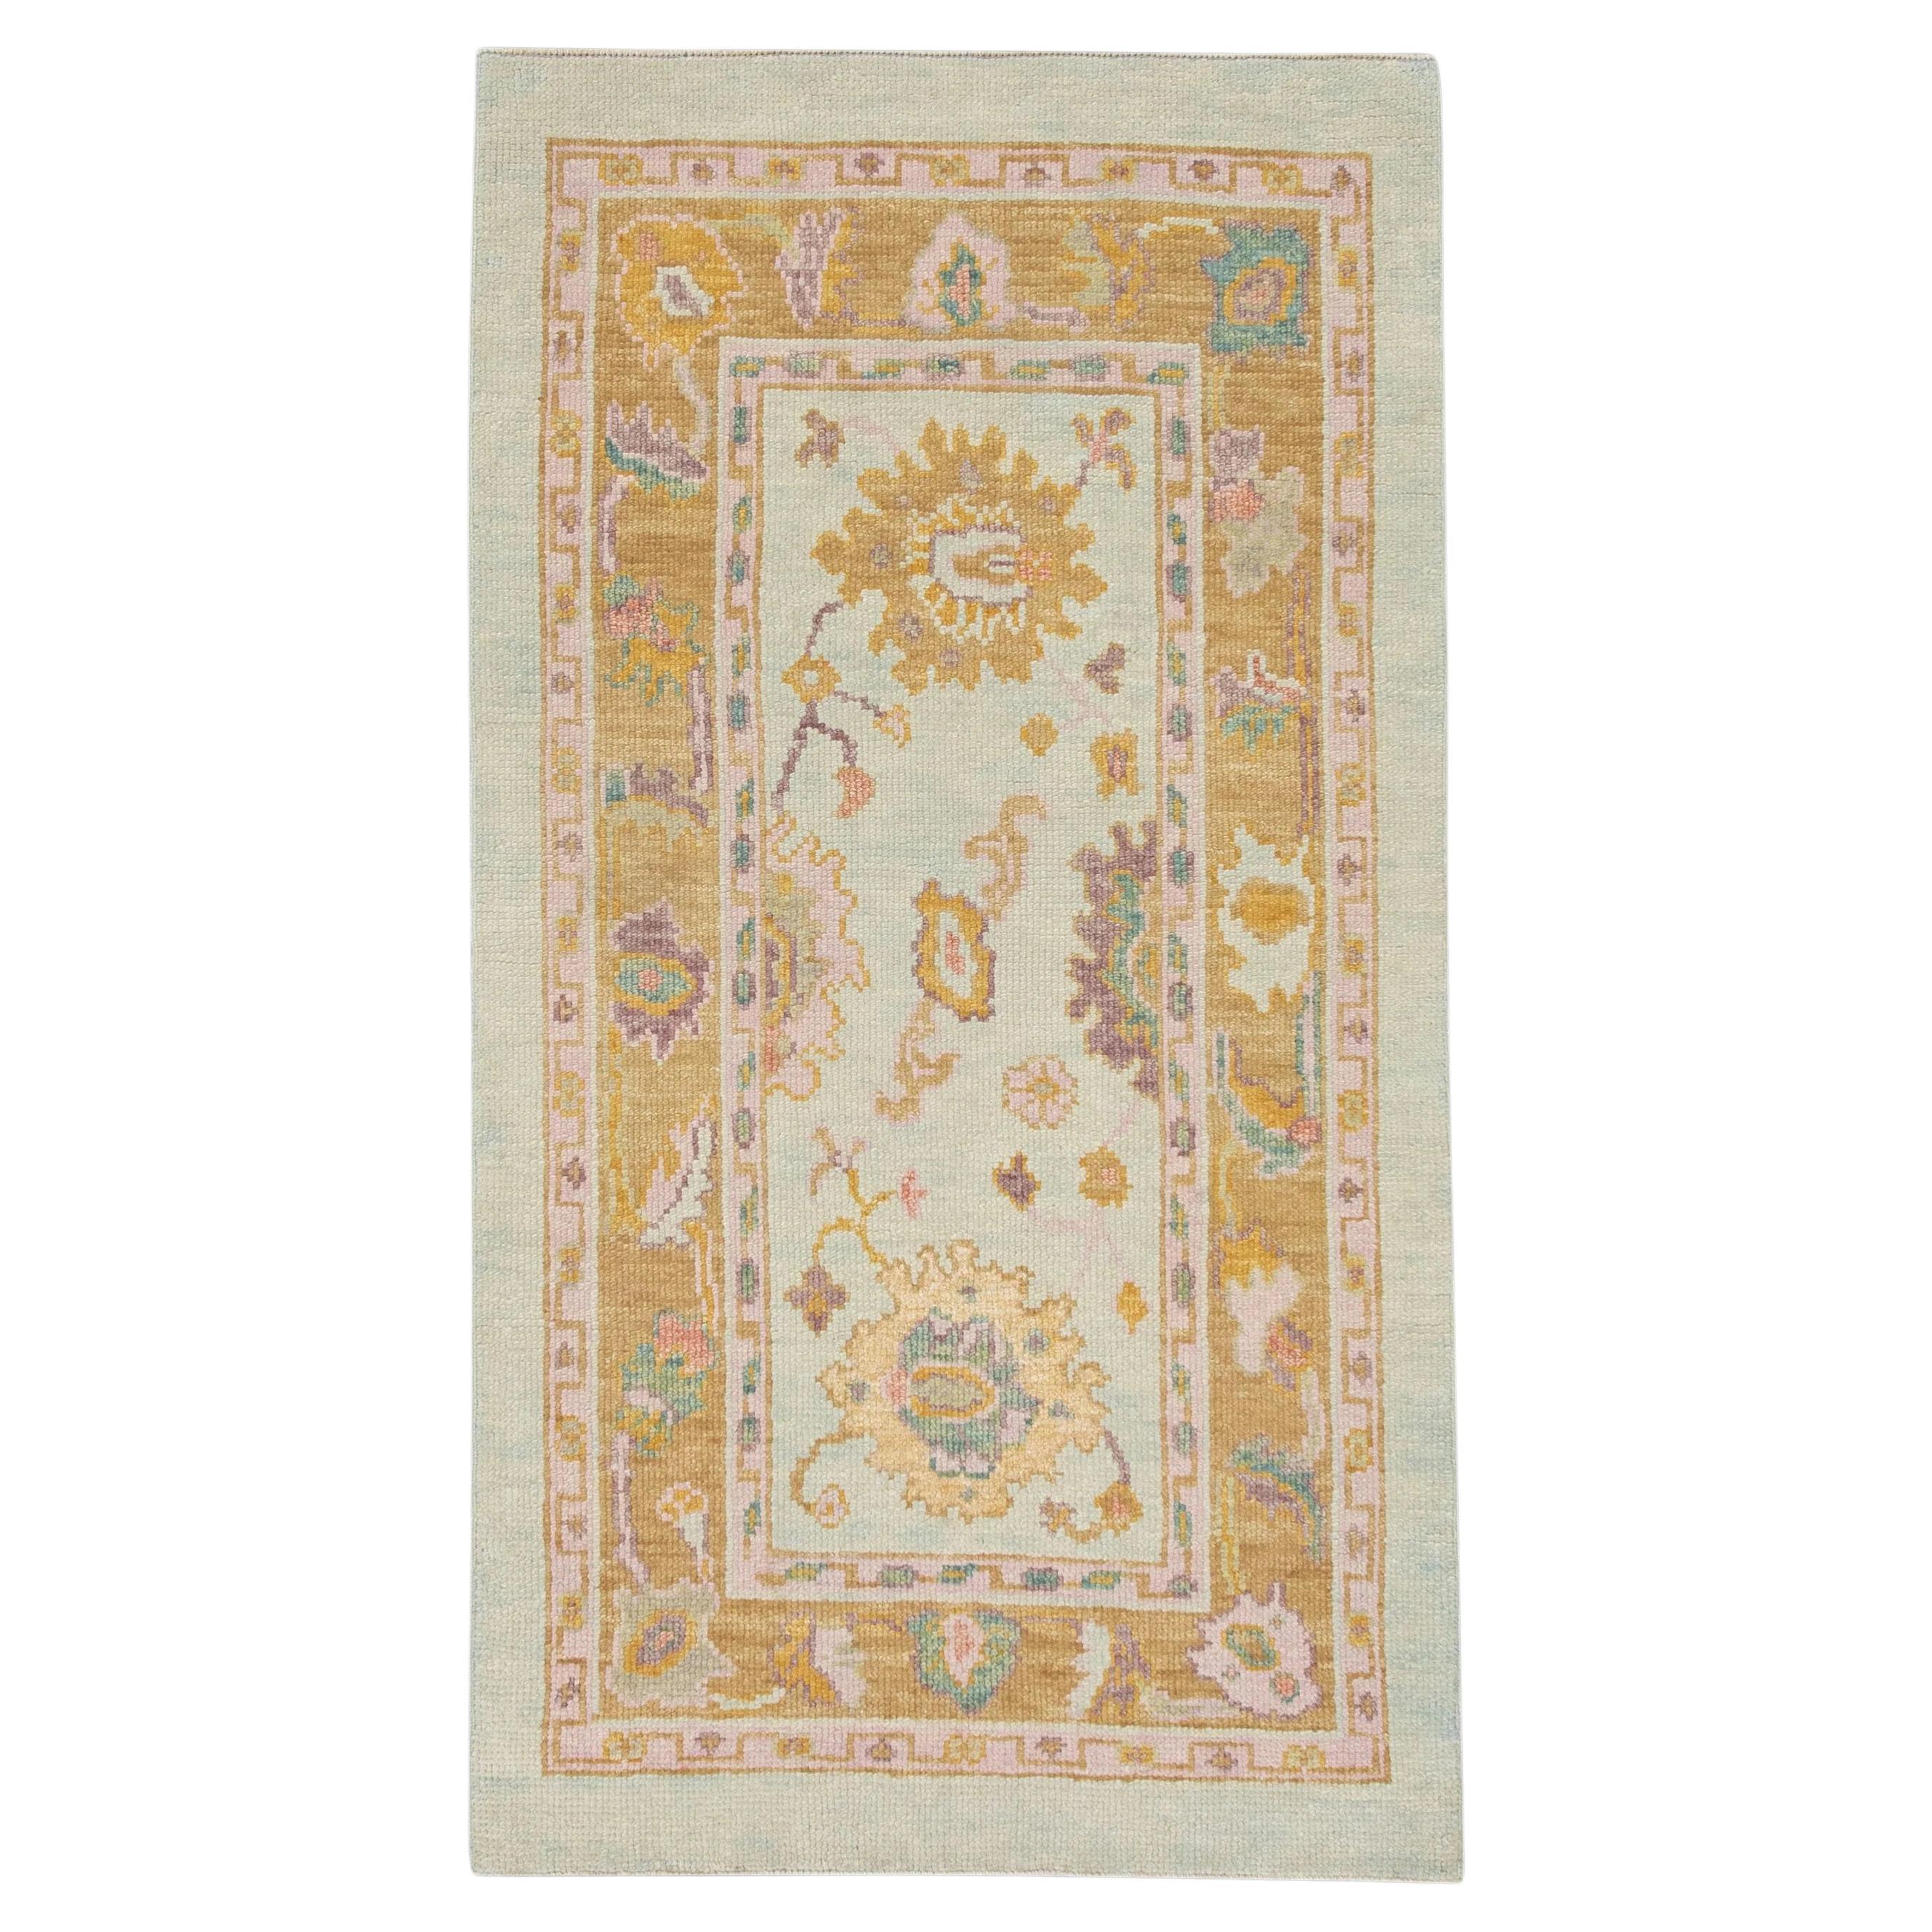 Handwoven Turkish Oushak Rug with Colorful Floral Design 2'10" x 5'2"